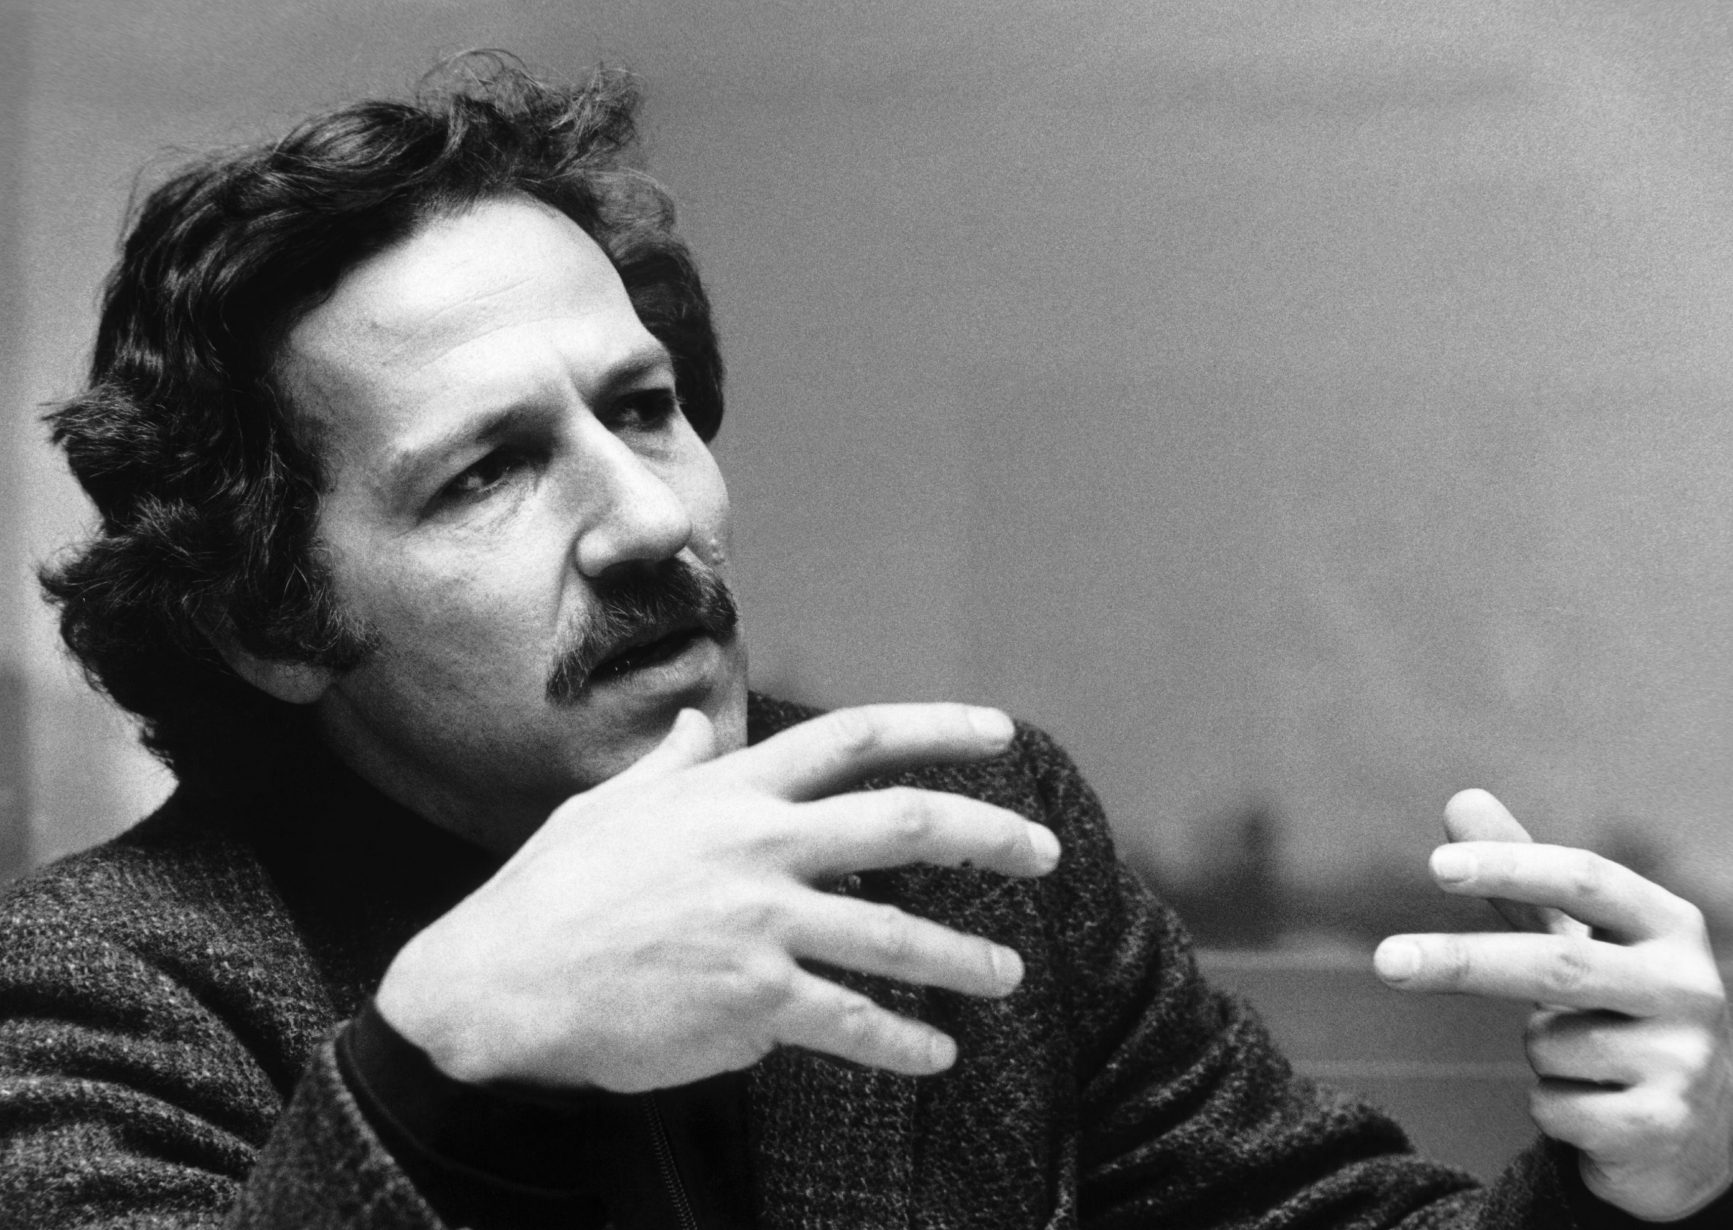 SWEDEN - JANUARY 27:  The German film-maker Werner HERZOG giving a press conference on January 27, 1977, the day before his film HEART OF GLASS was to be released in Sweden.  (Photo by Keystone-France/Gamma-Keystone via Getty Images)